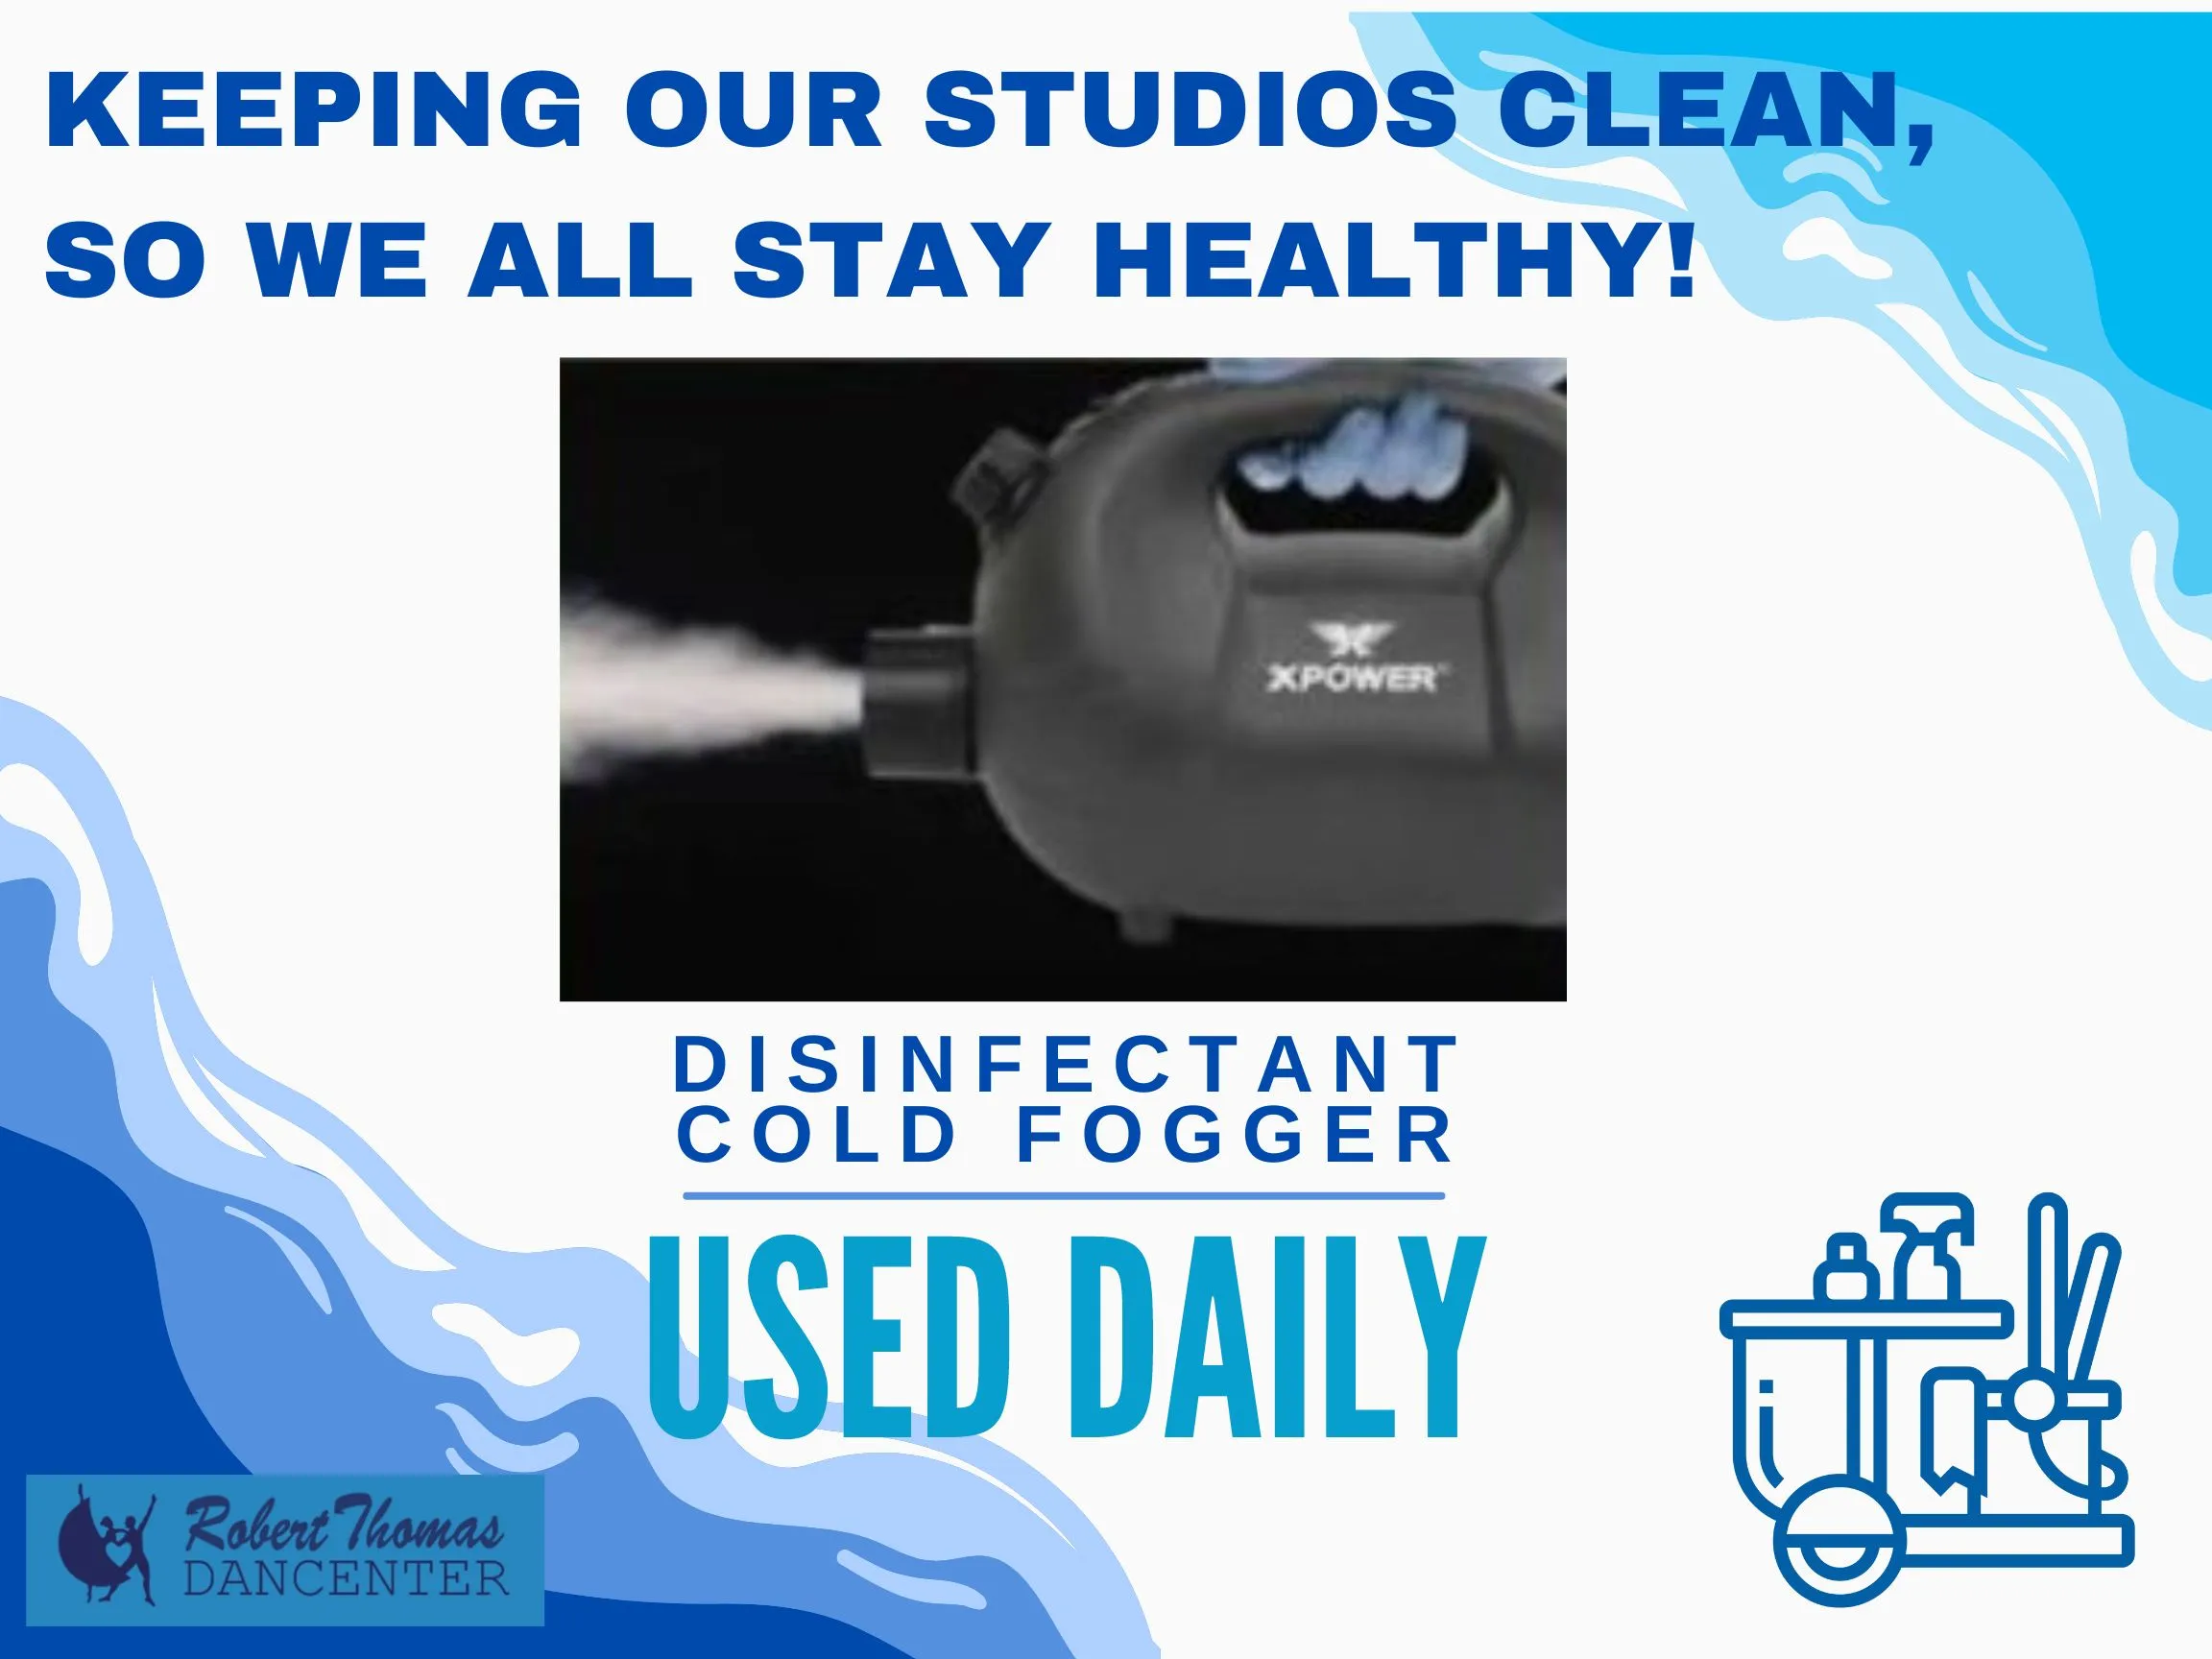 Flyer - Disinfectant cold fogger used daily